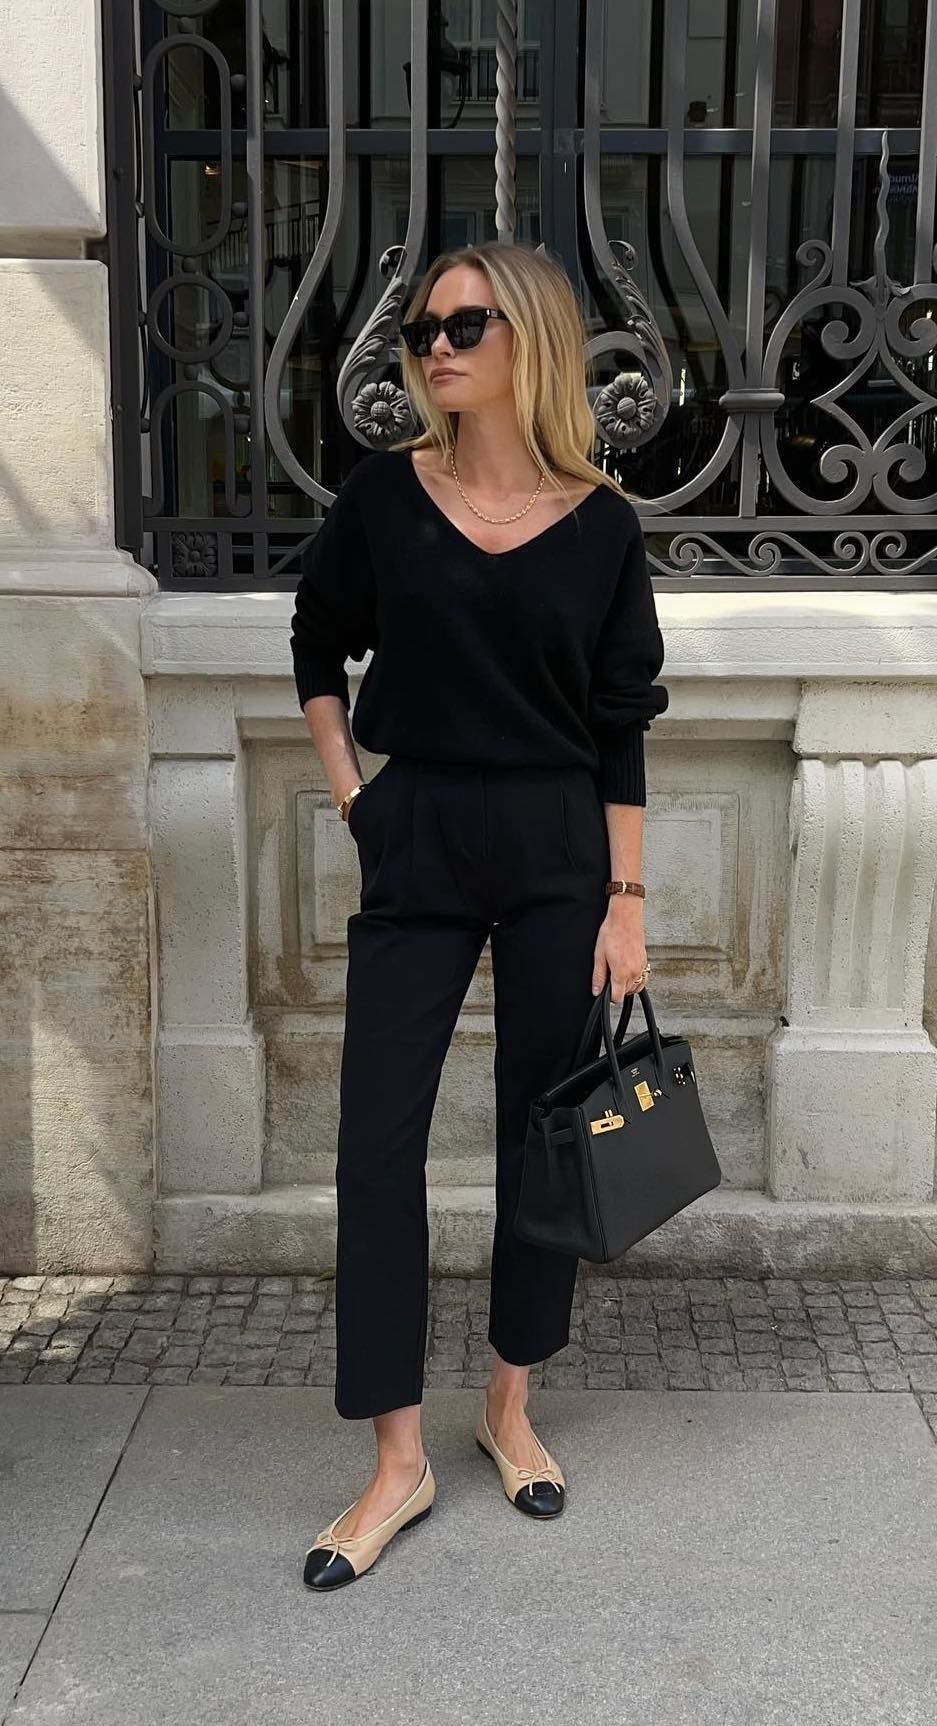 French Fall outfits all black pants chanel flats hermes birkin bag clairerose